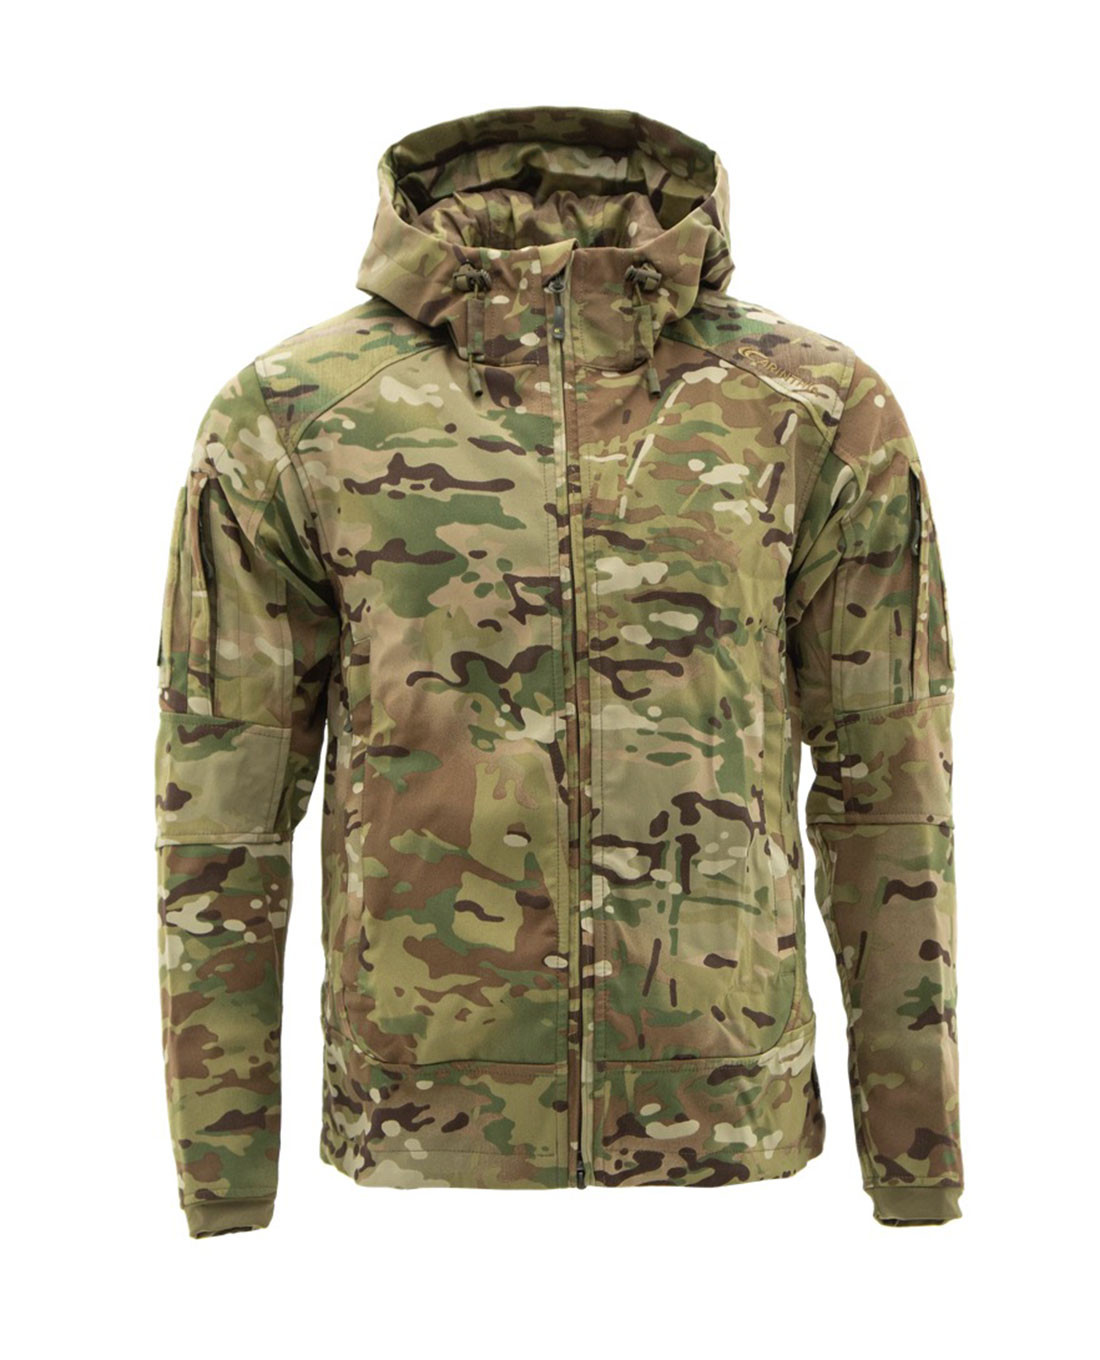 Carinthia Softshell Jacket SpezKr Multicam - EXCL MG083x - TACWRK